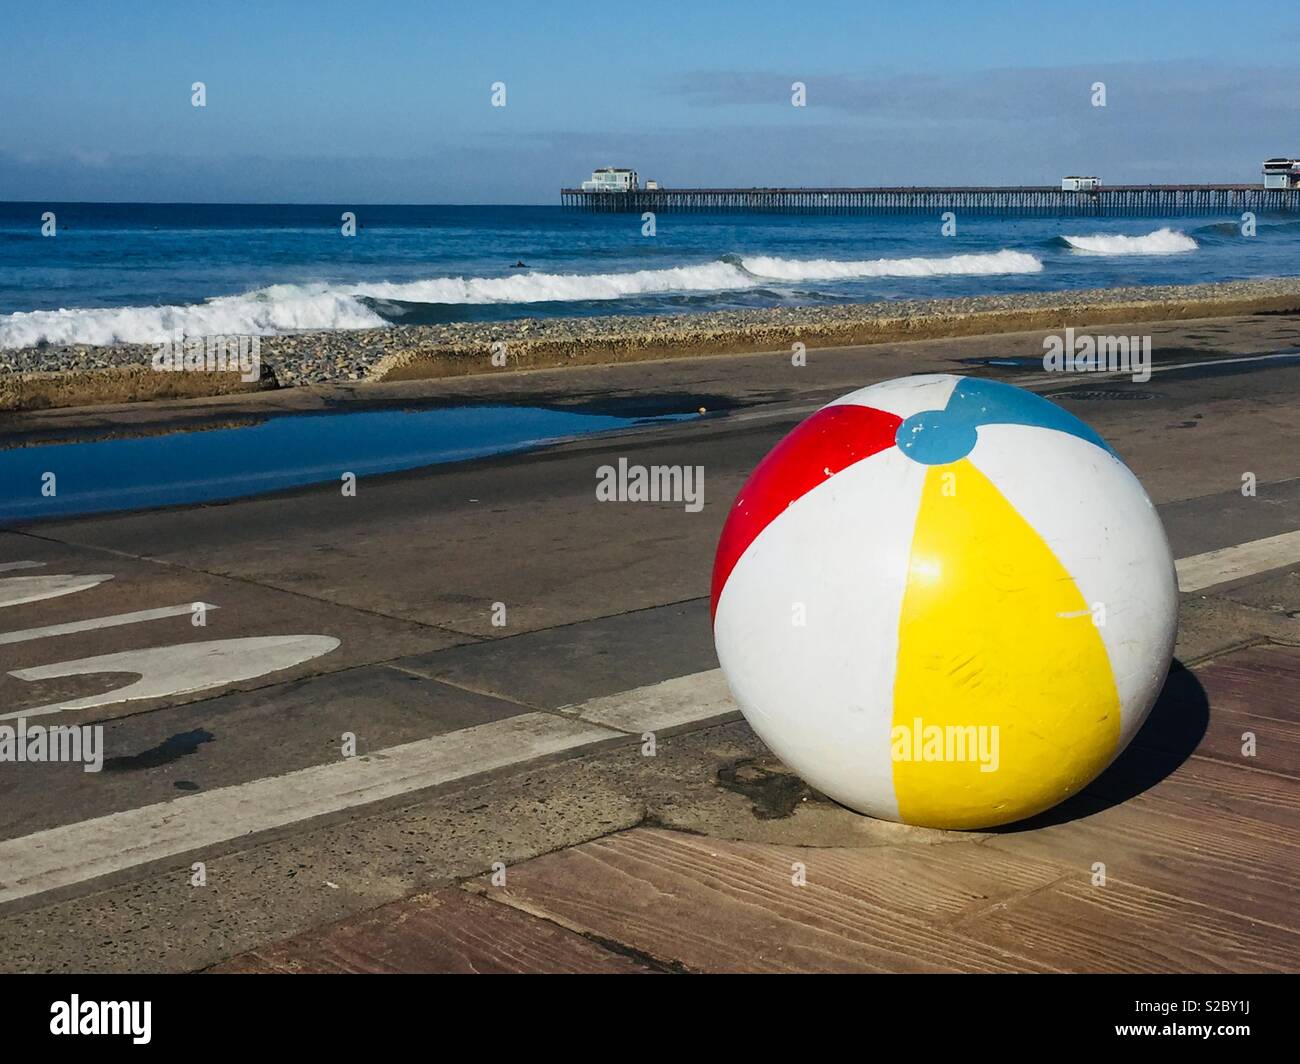 A scenic view of the Oceanside, California pier from the public park by the beach. A cute, colorful cement barrier painted as a beach ball is in the foreground. Stock Photo